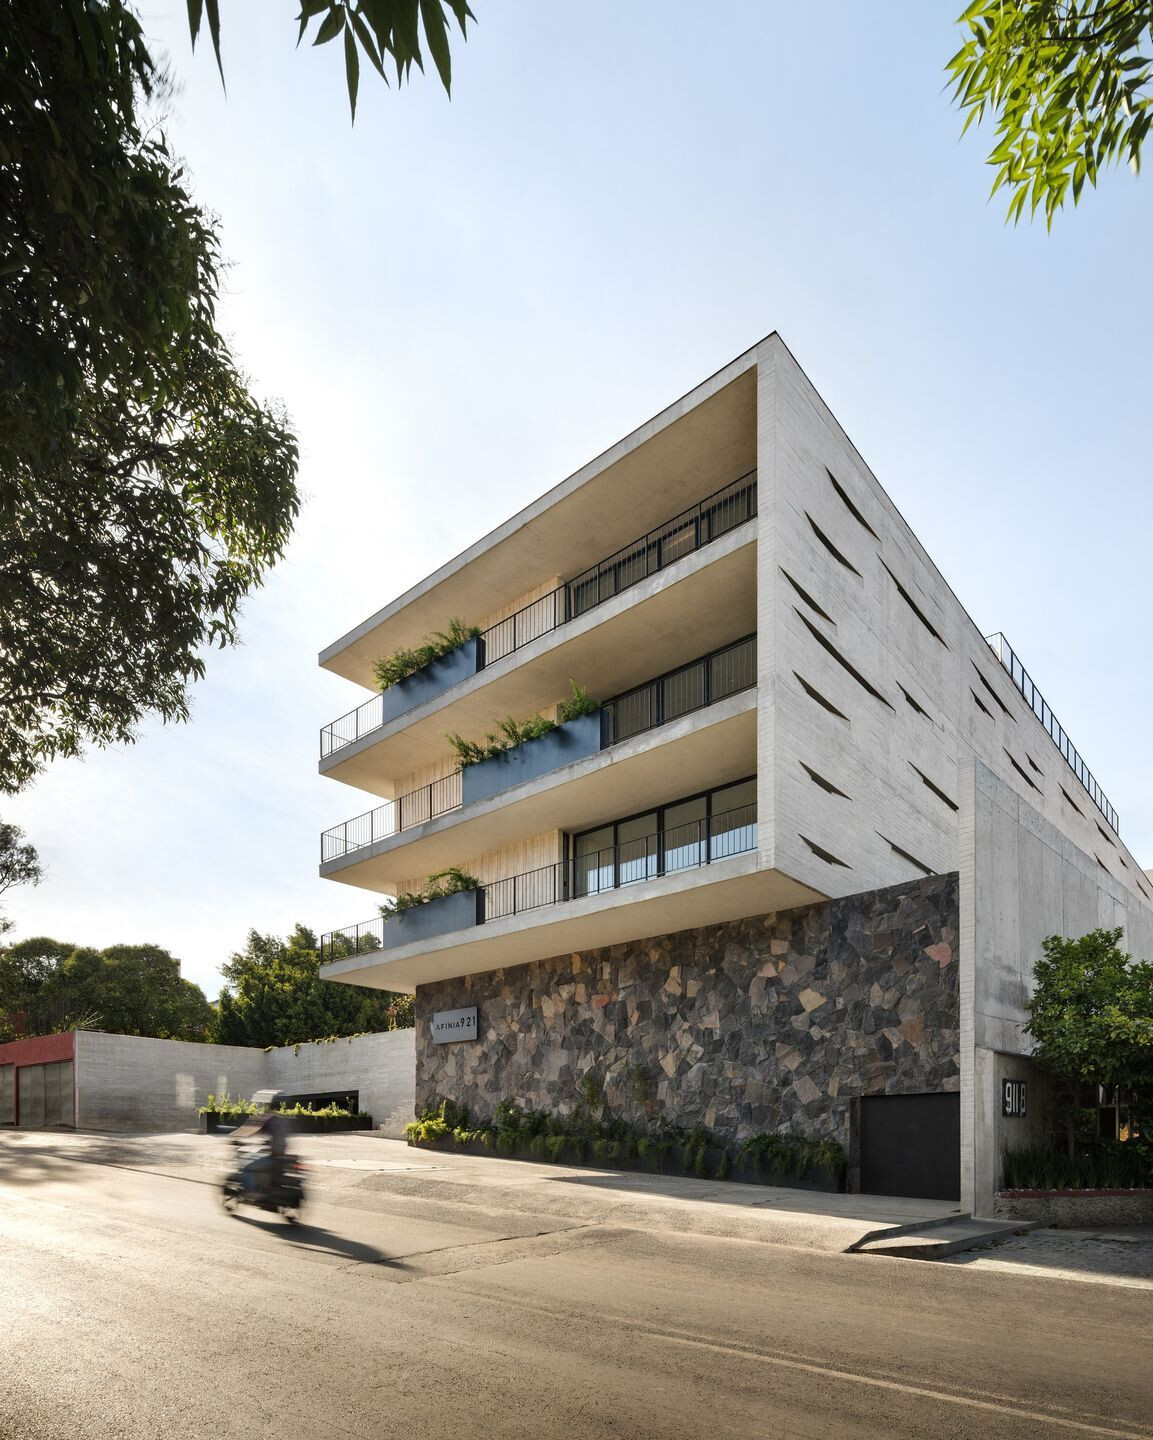 photo_credit ODP Aapartments by Michan Architecture - © Rafael Gamo